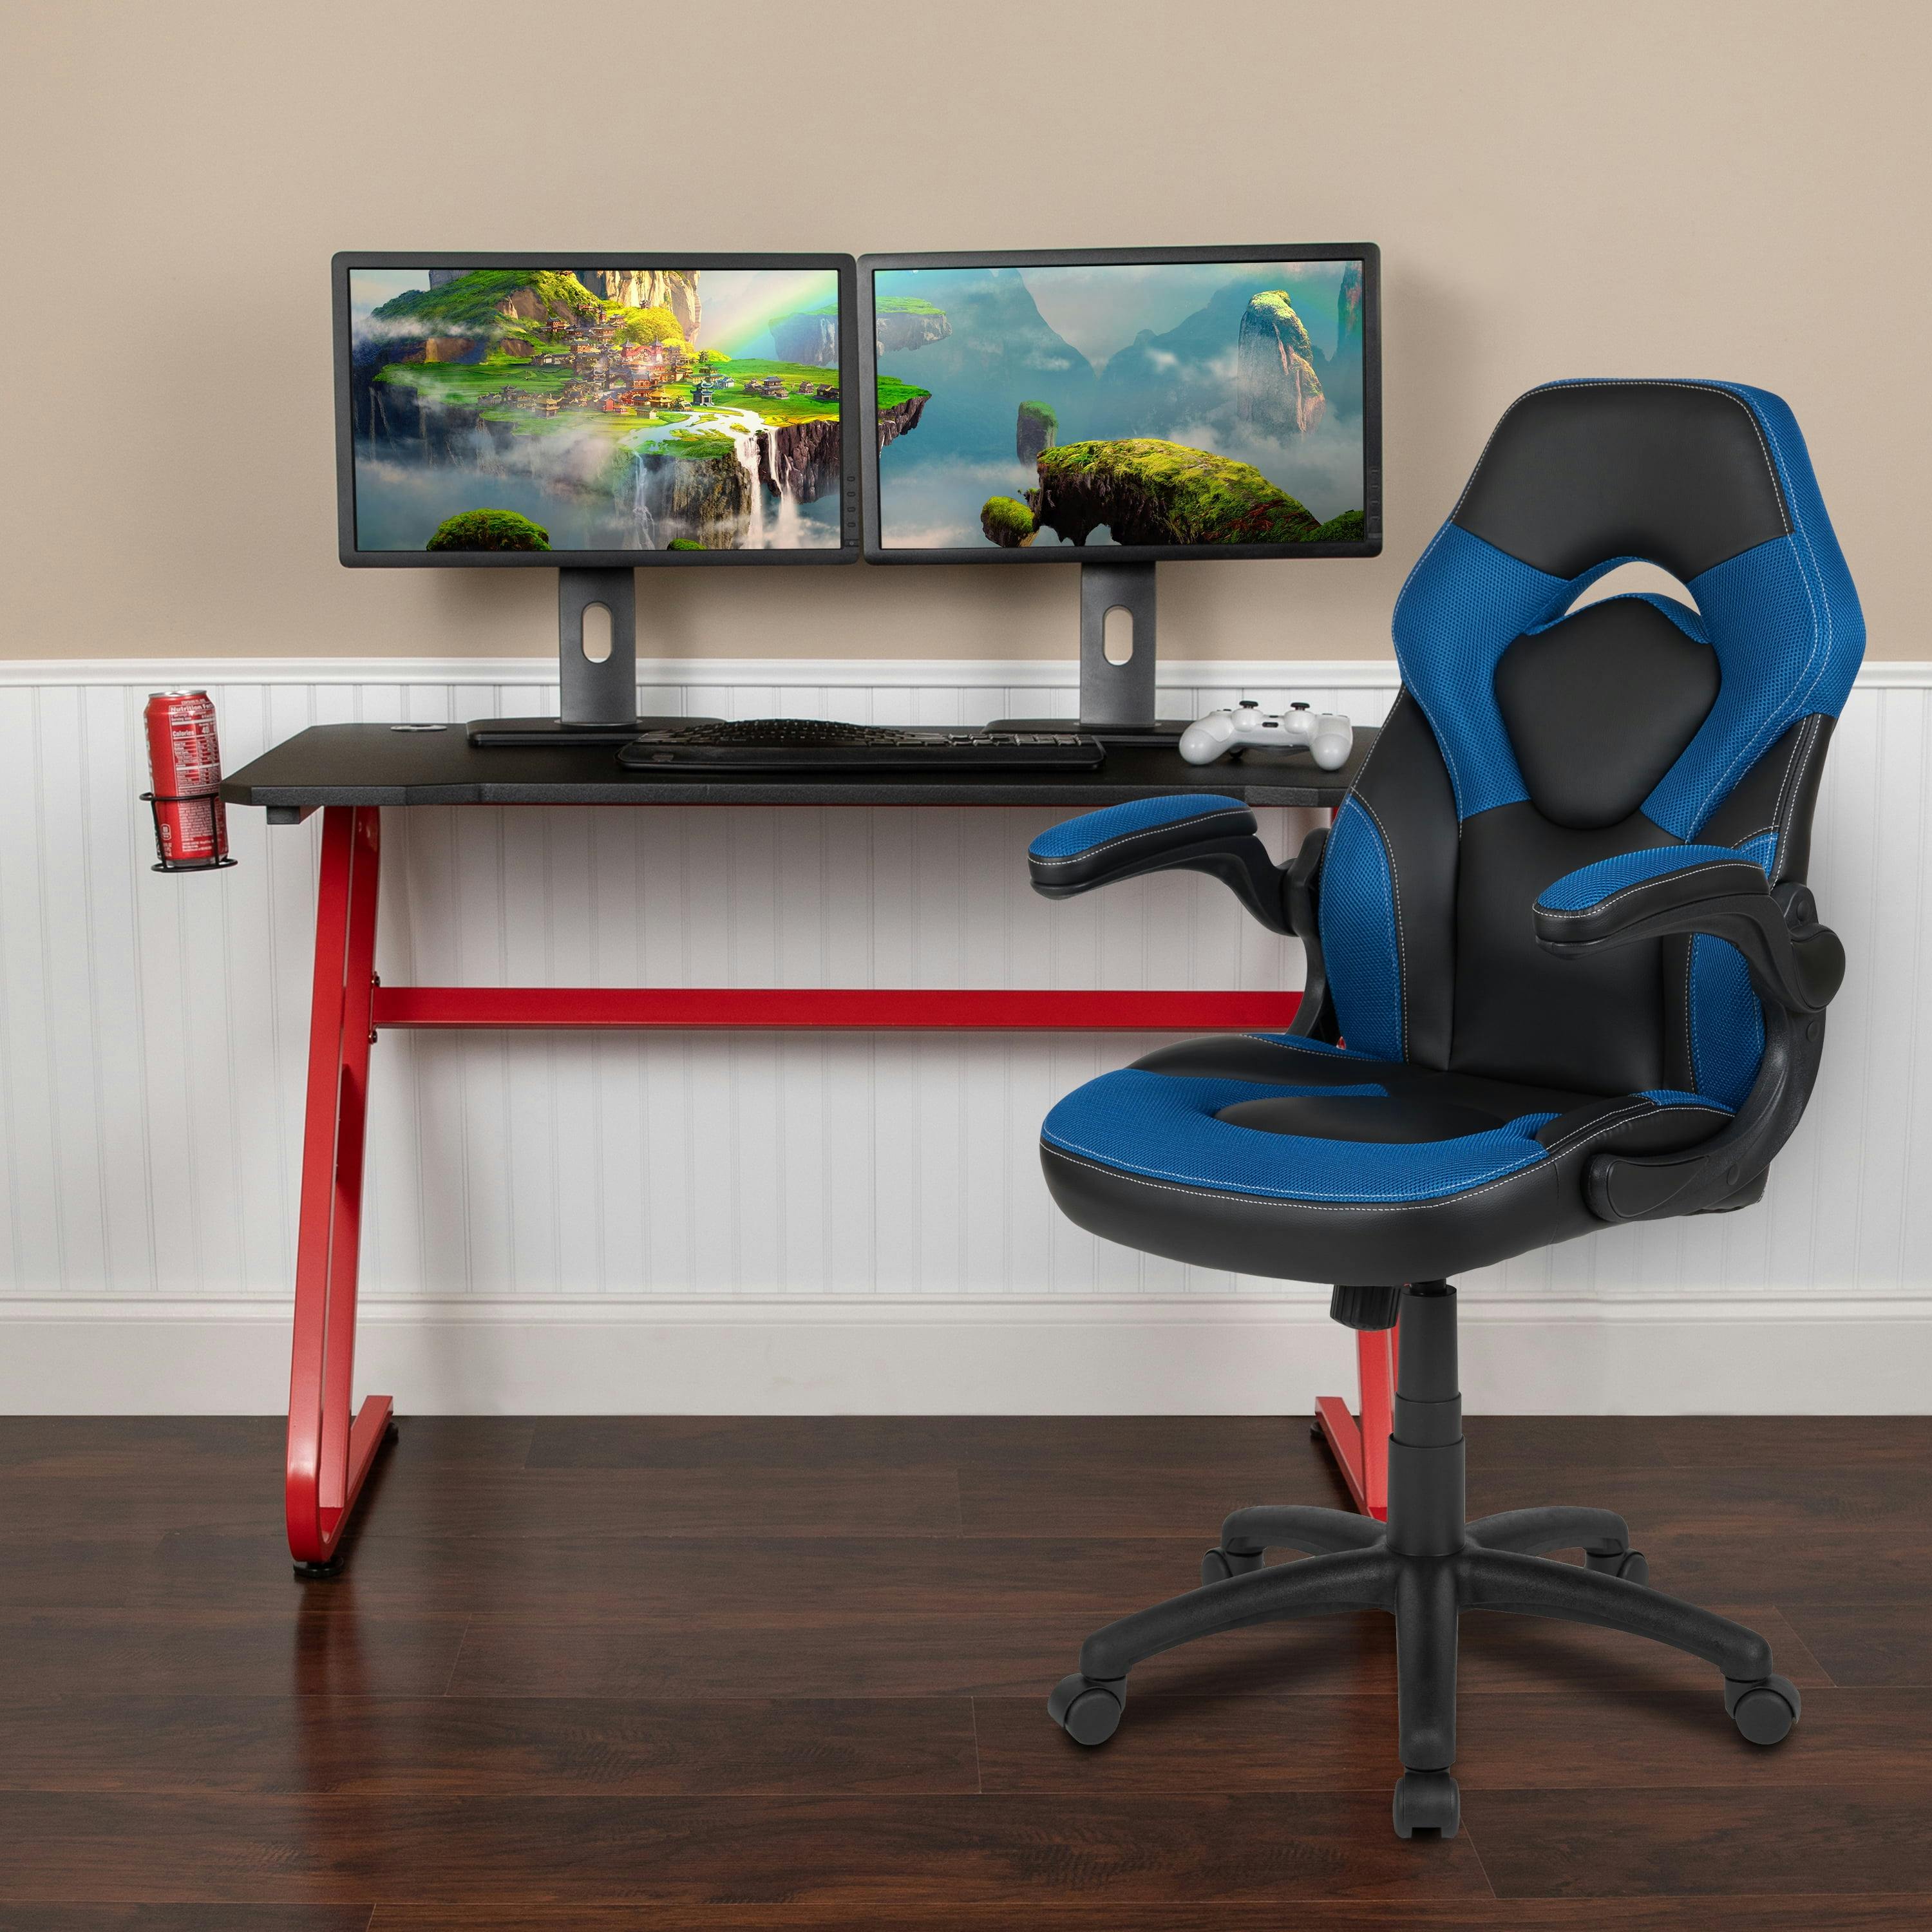 Sleek 50" Blue and Black Gaming Desk & Chair Set with Cup Holder